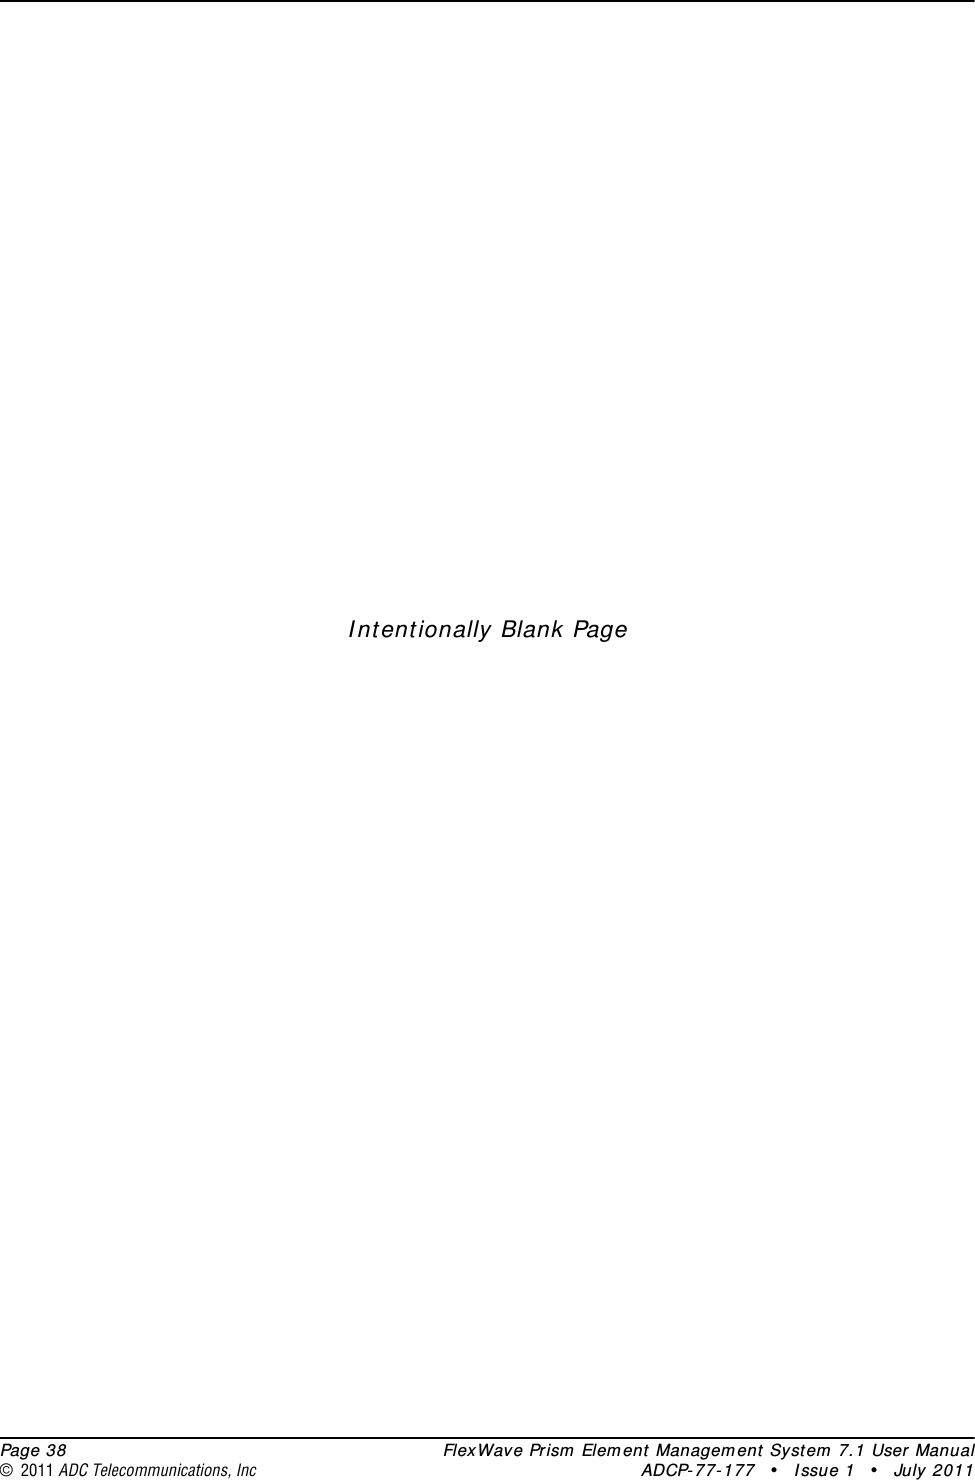  Page 38 FlexWave Prism Element Management System 7.1 User Manual© 2011 ADC Telecommunications, Inc ADCP-77-177 • Issue 1 • July 2011Intentionally Blank Page